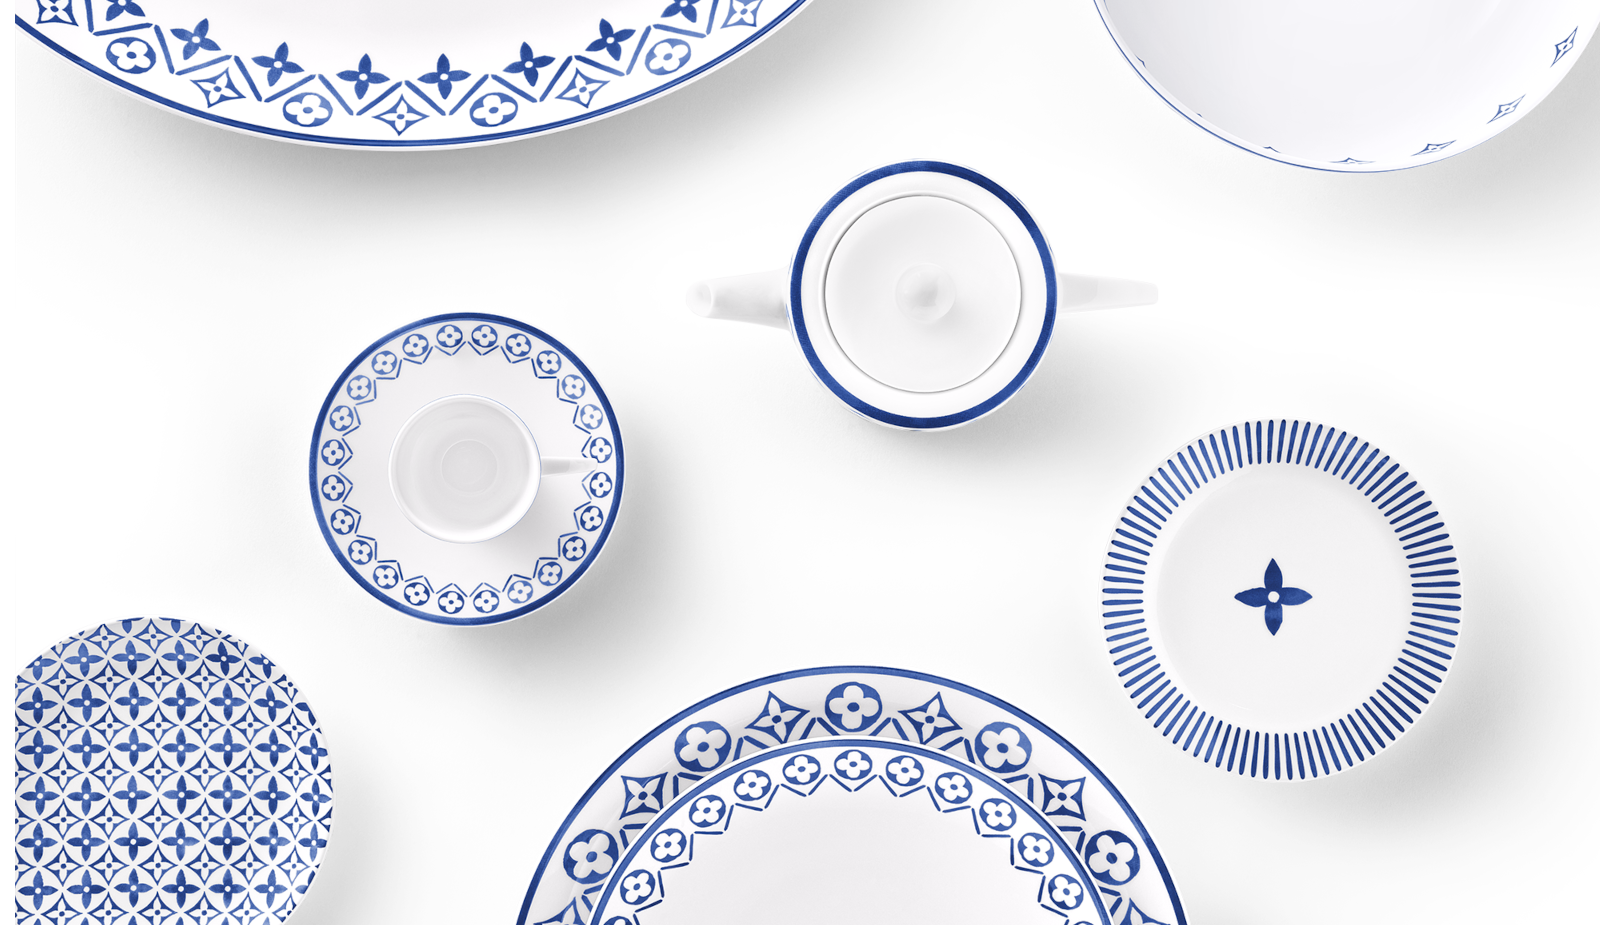 The first Louis Vuitton tableware collection